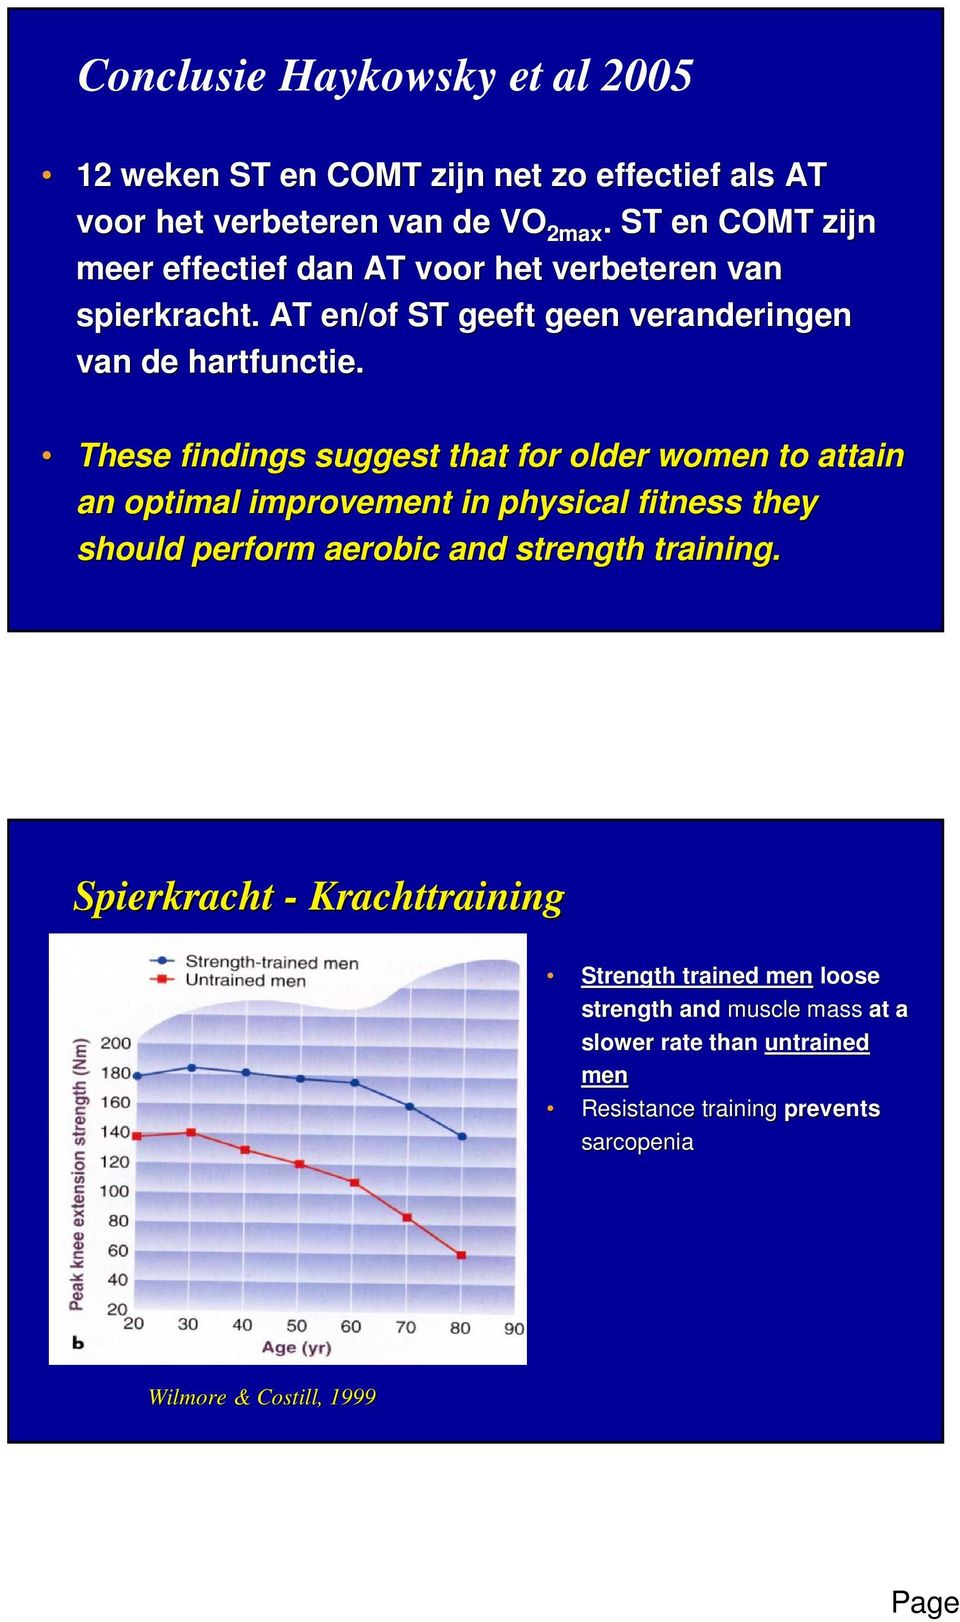 These findings suggest that for older women to attain an optimal improvement in physical fitness they should perform aerobic and strength